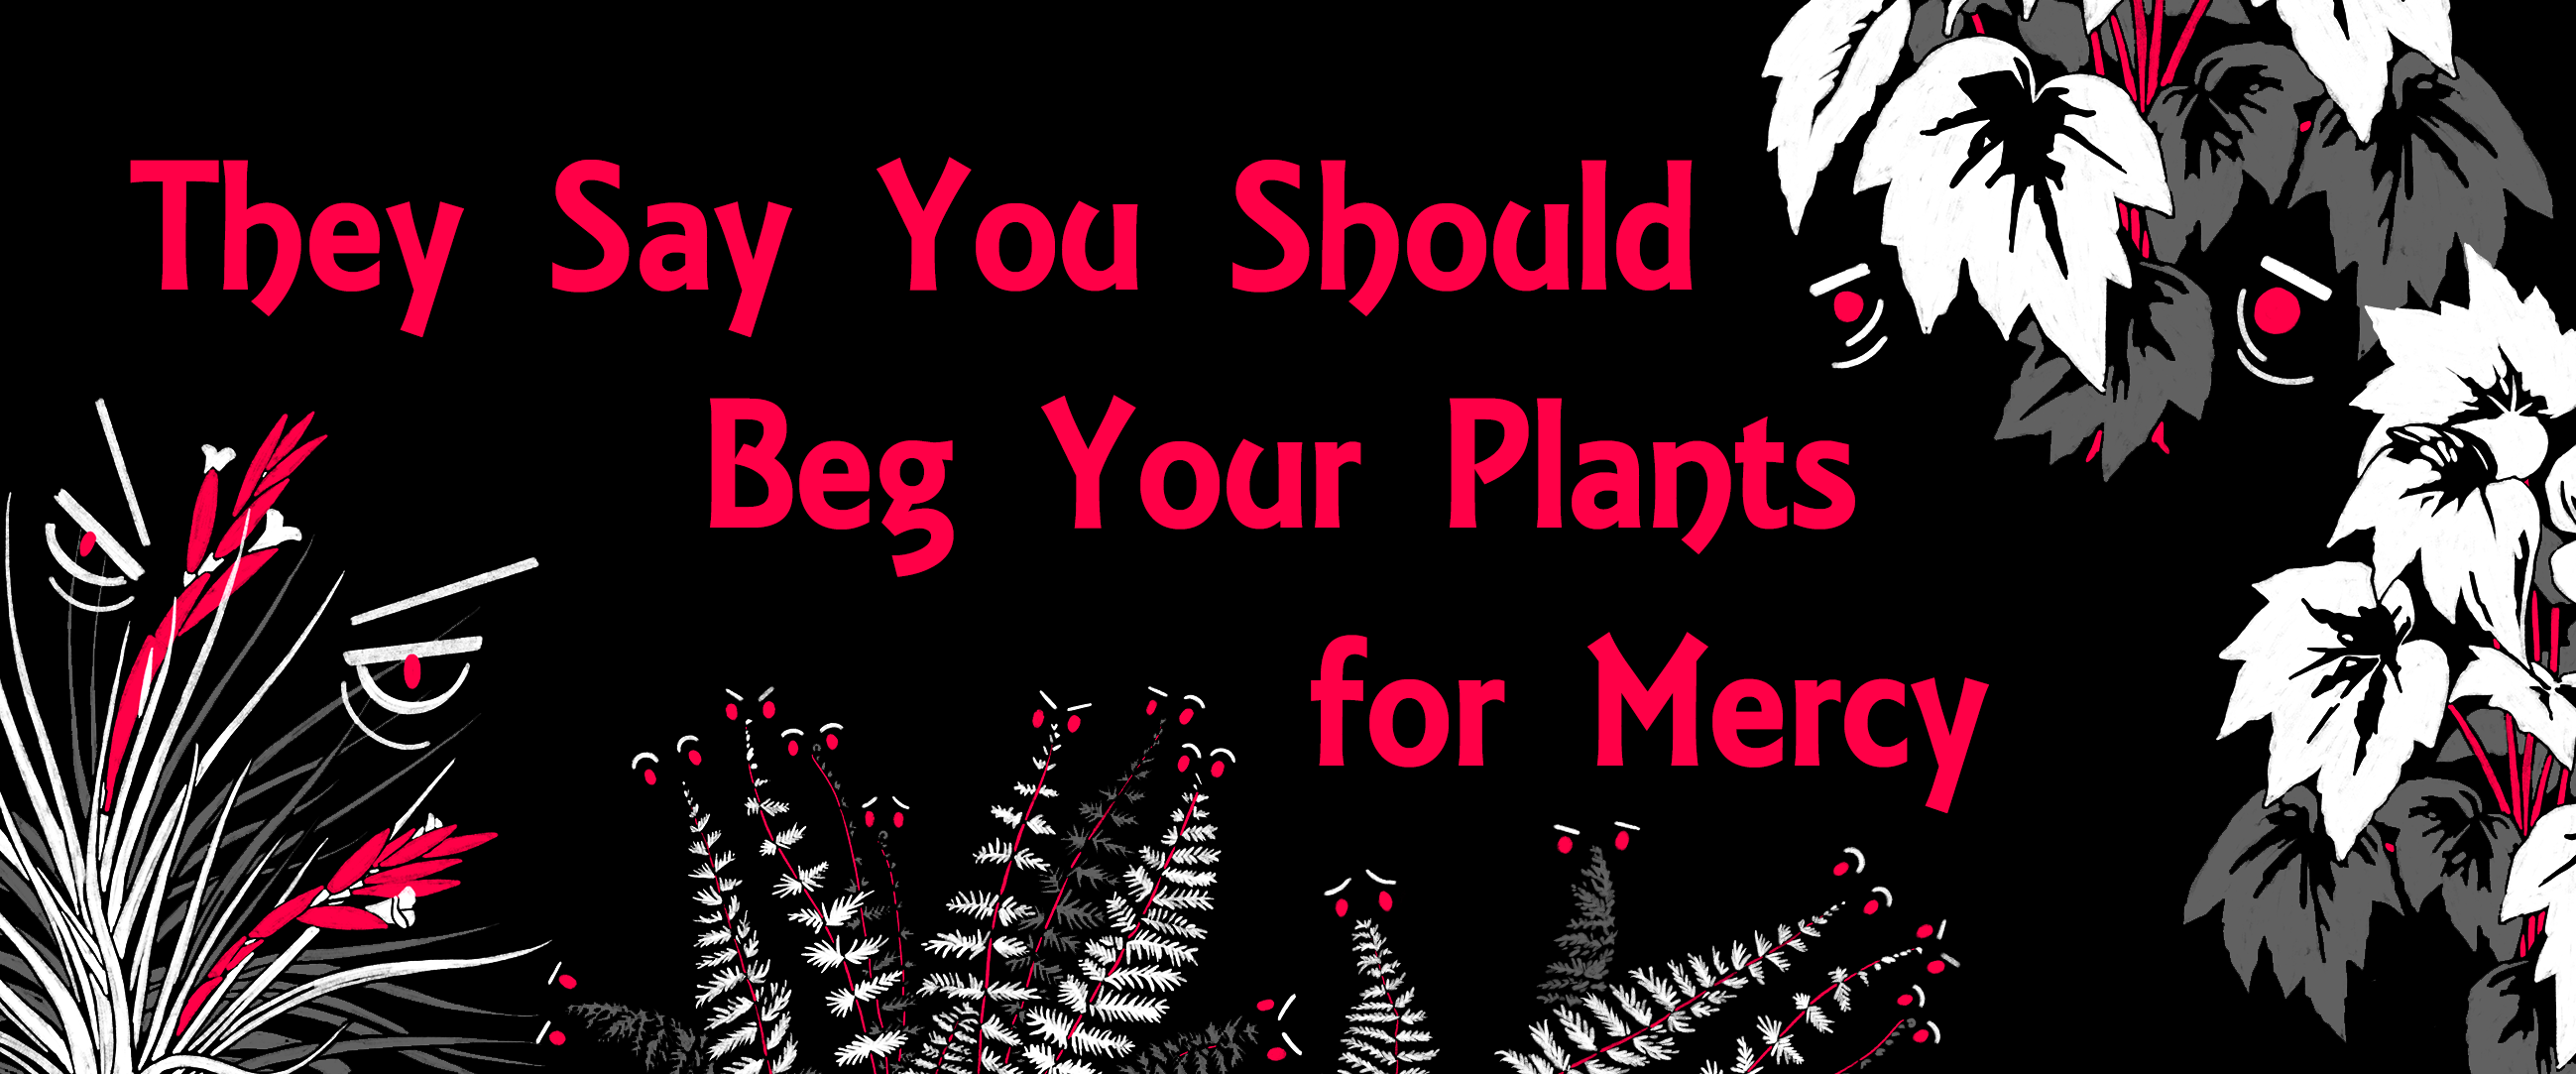 They Say You Should Beg Your Plants for Mercy